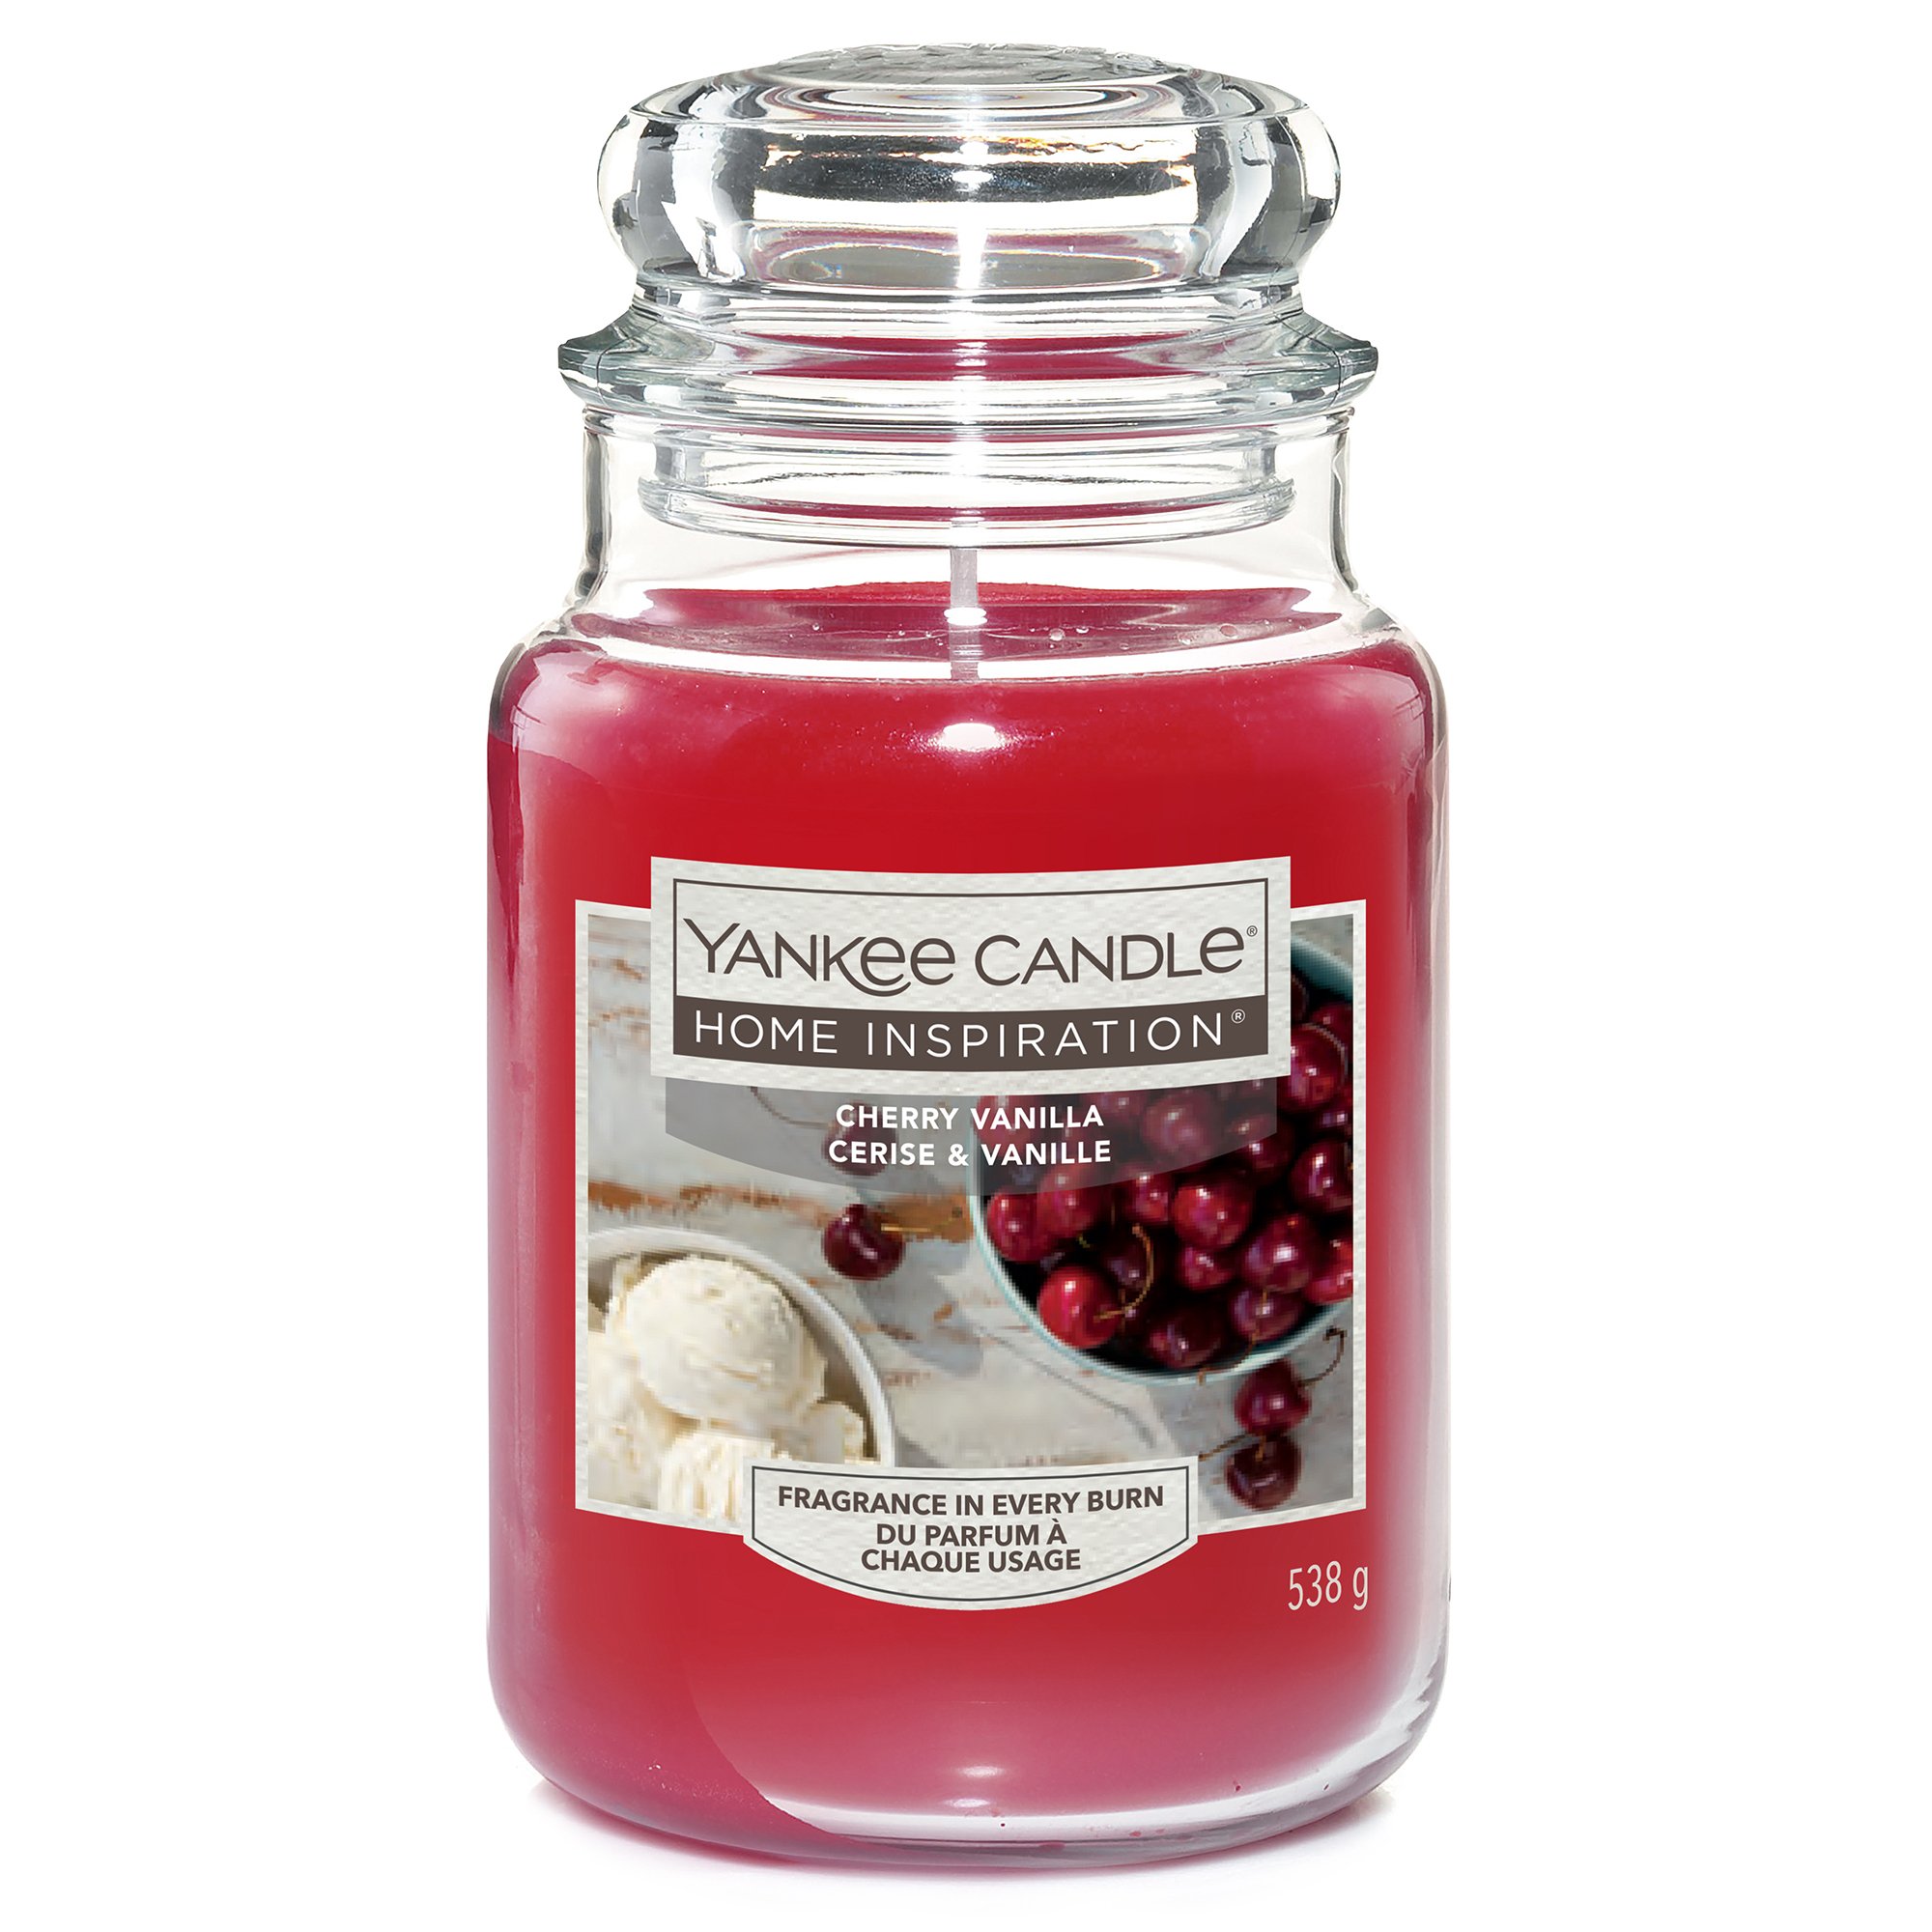 Large Home Inspiration Yankee Candle - Cherry Vanilla